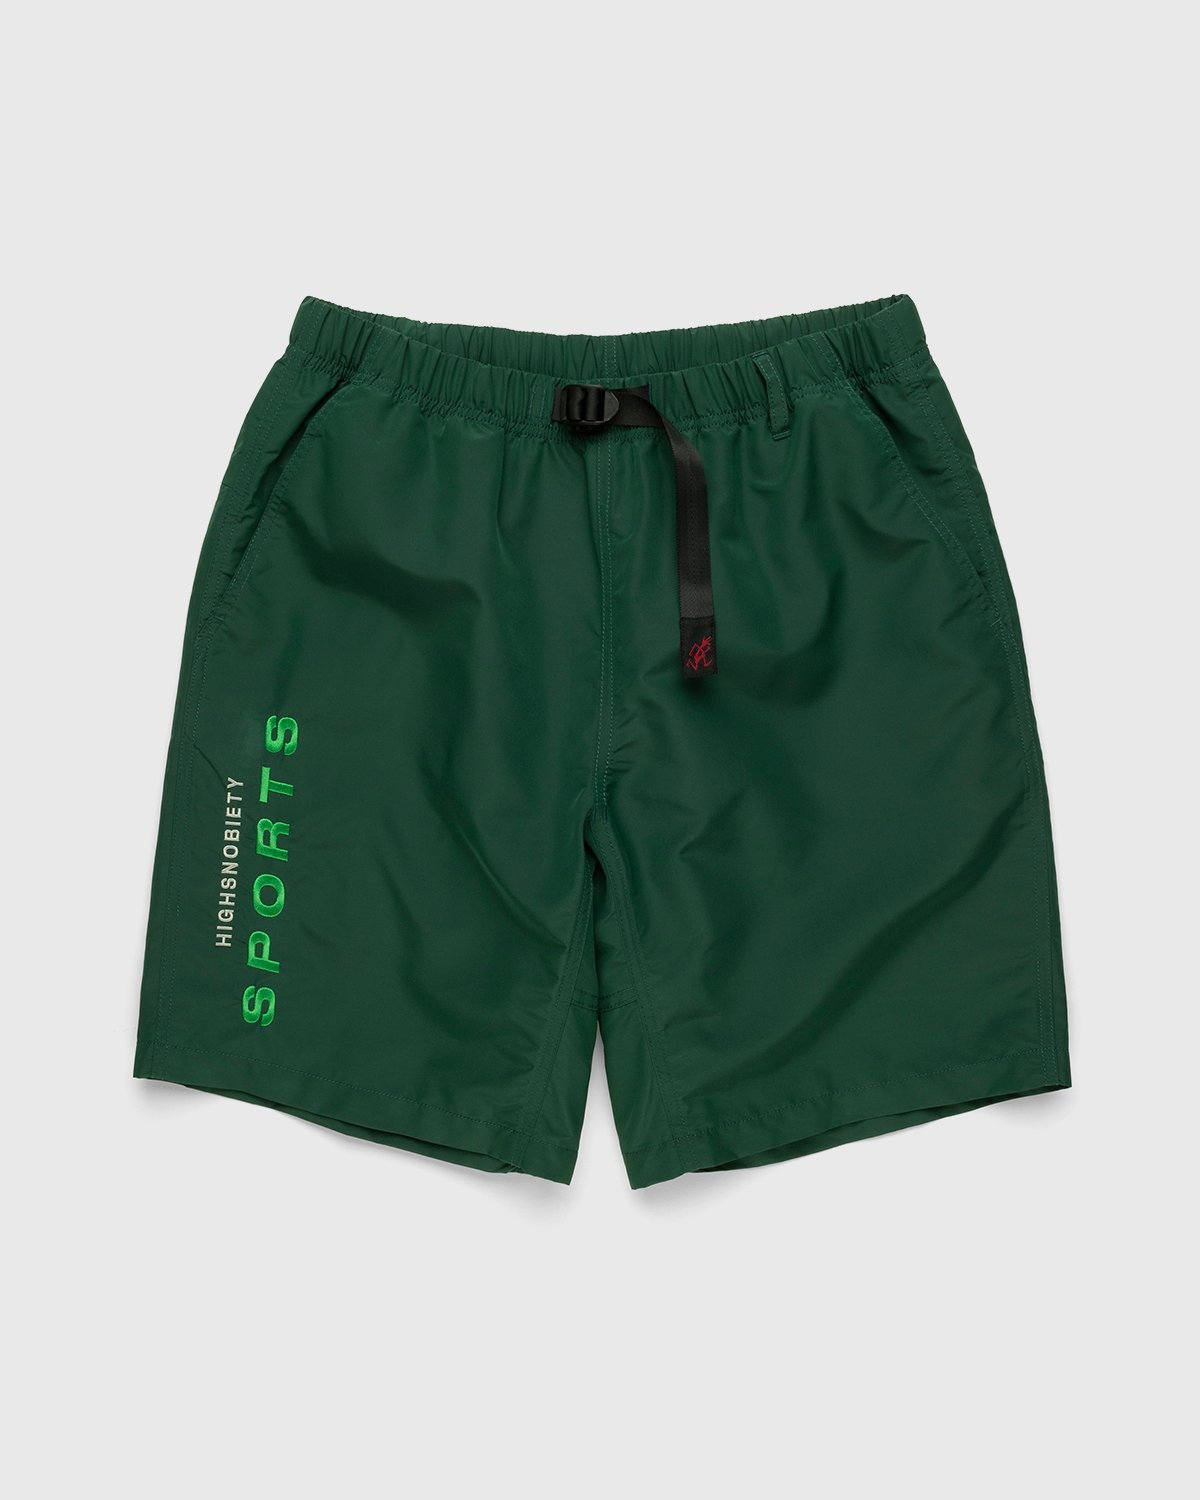 Gramicci x Highsnobiety - HS Sports Shell Packable Shorts Forest Green - Clothing - Green - Image 1